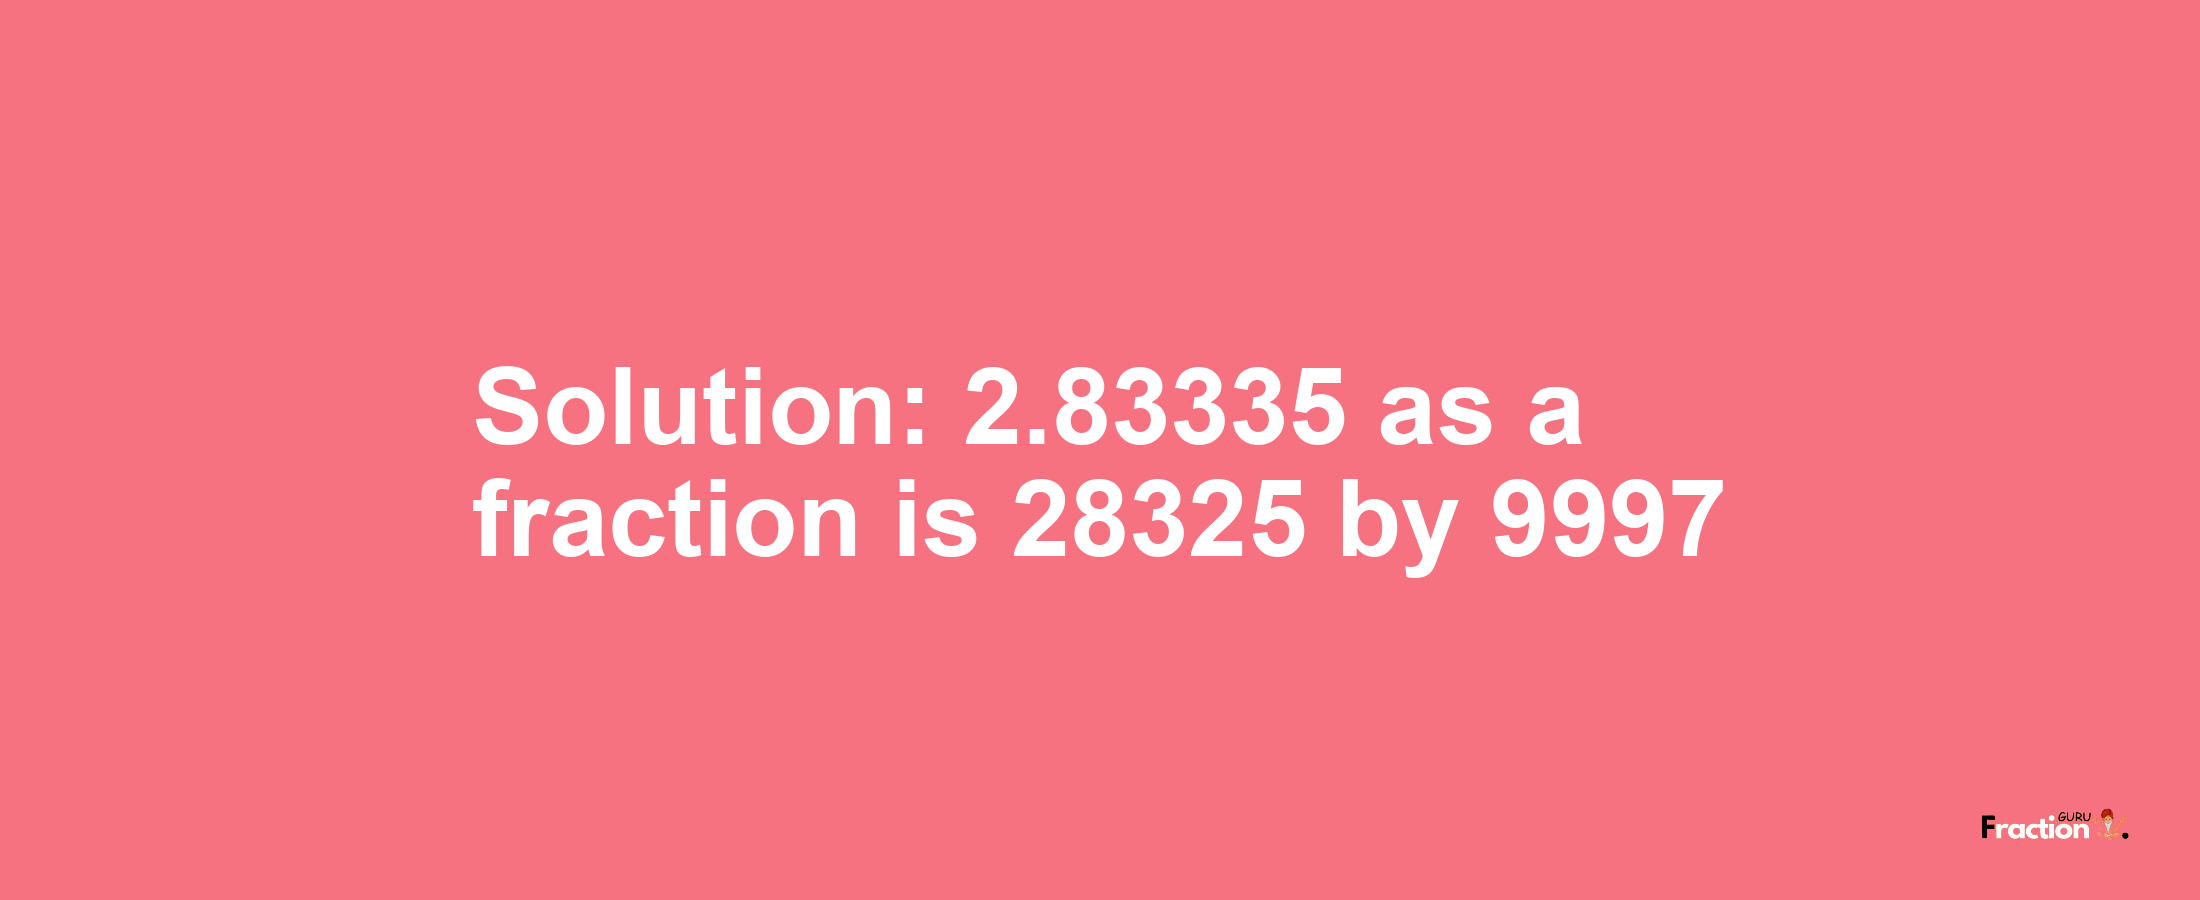 Solution:2.83335 as a fraction is 28325/9997